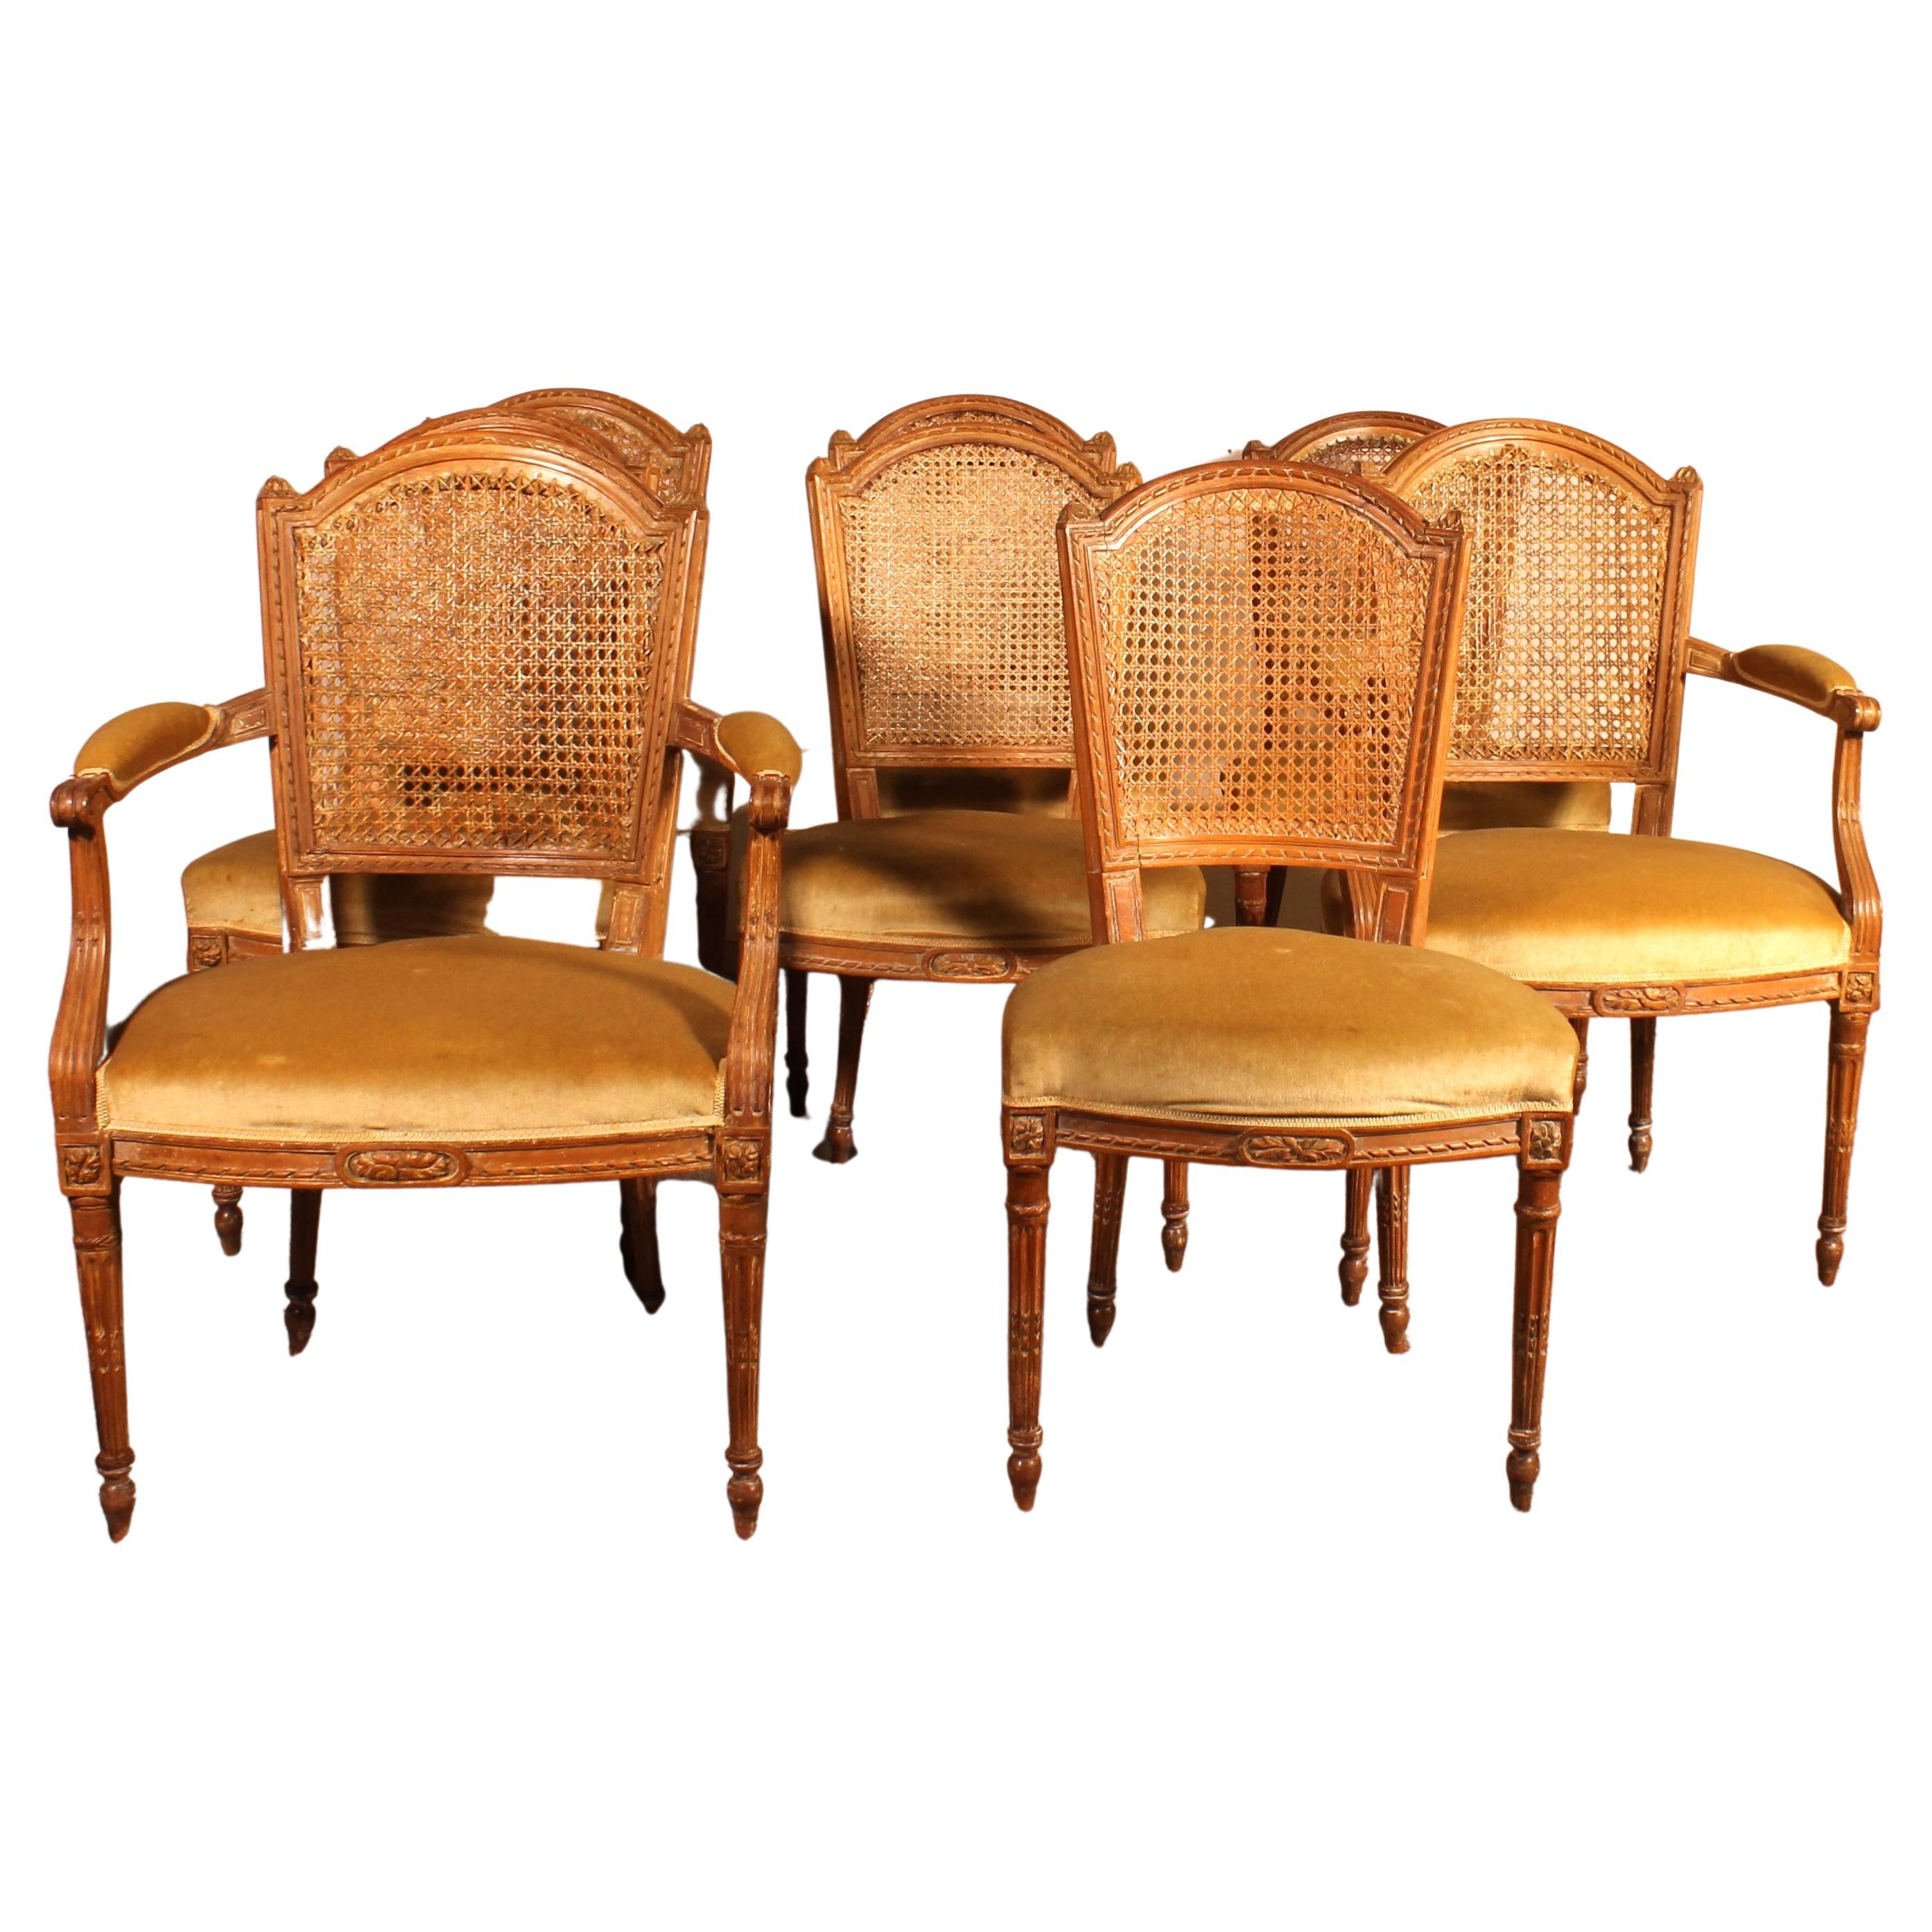 Set of 6 Chairs and Two Louis XVI Armchairs, 18th Century